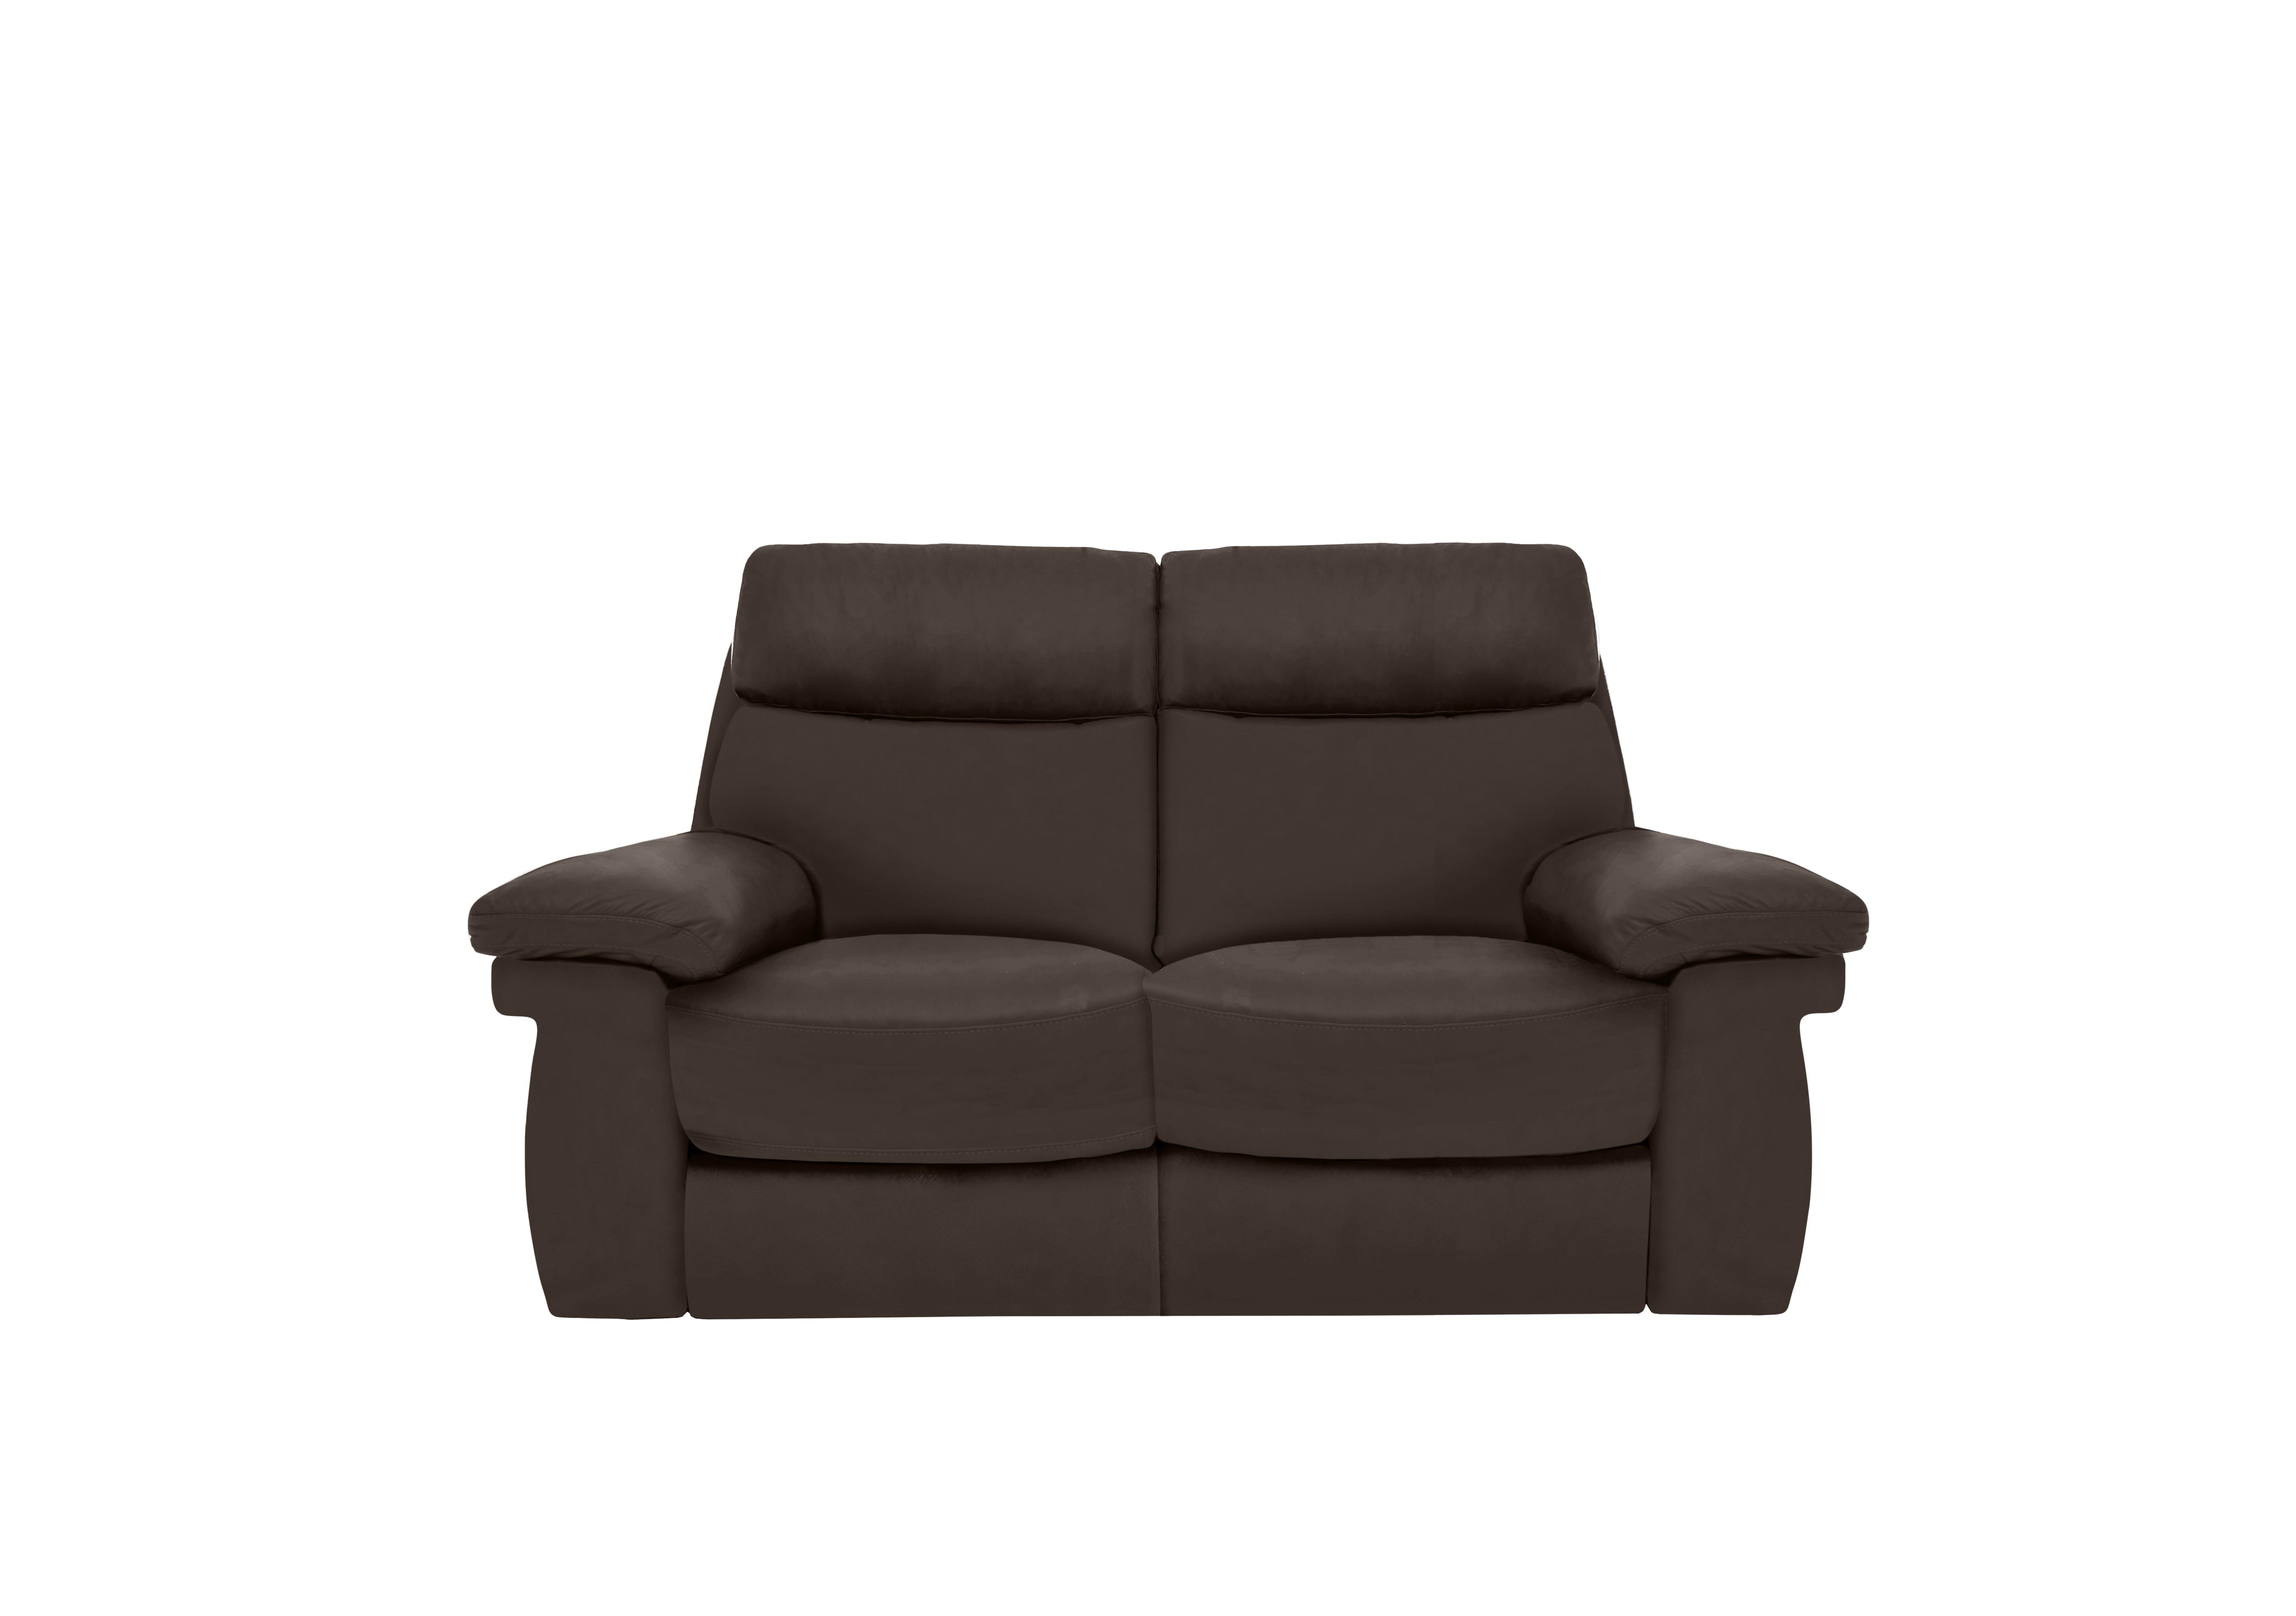 Serene 2 Seater Leather Power Recliner Sofa with Power Headrests in Bx-037c Walnut on Furniture Village